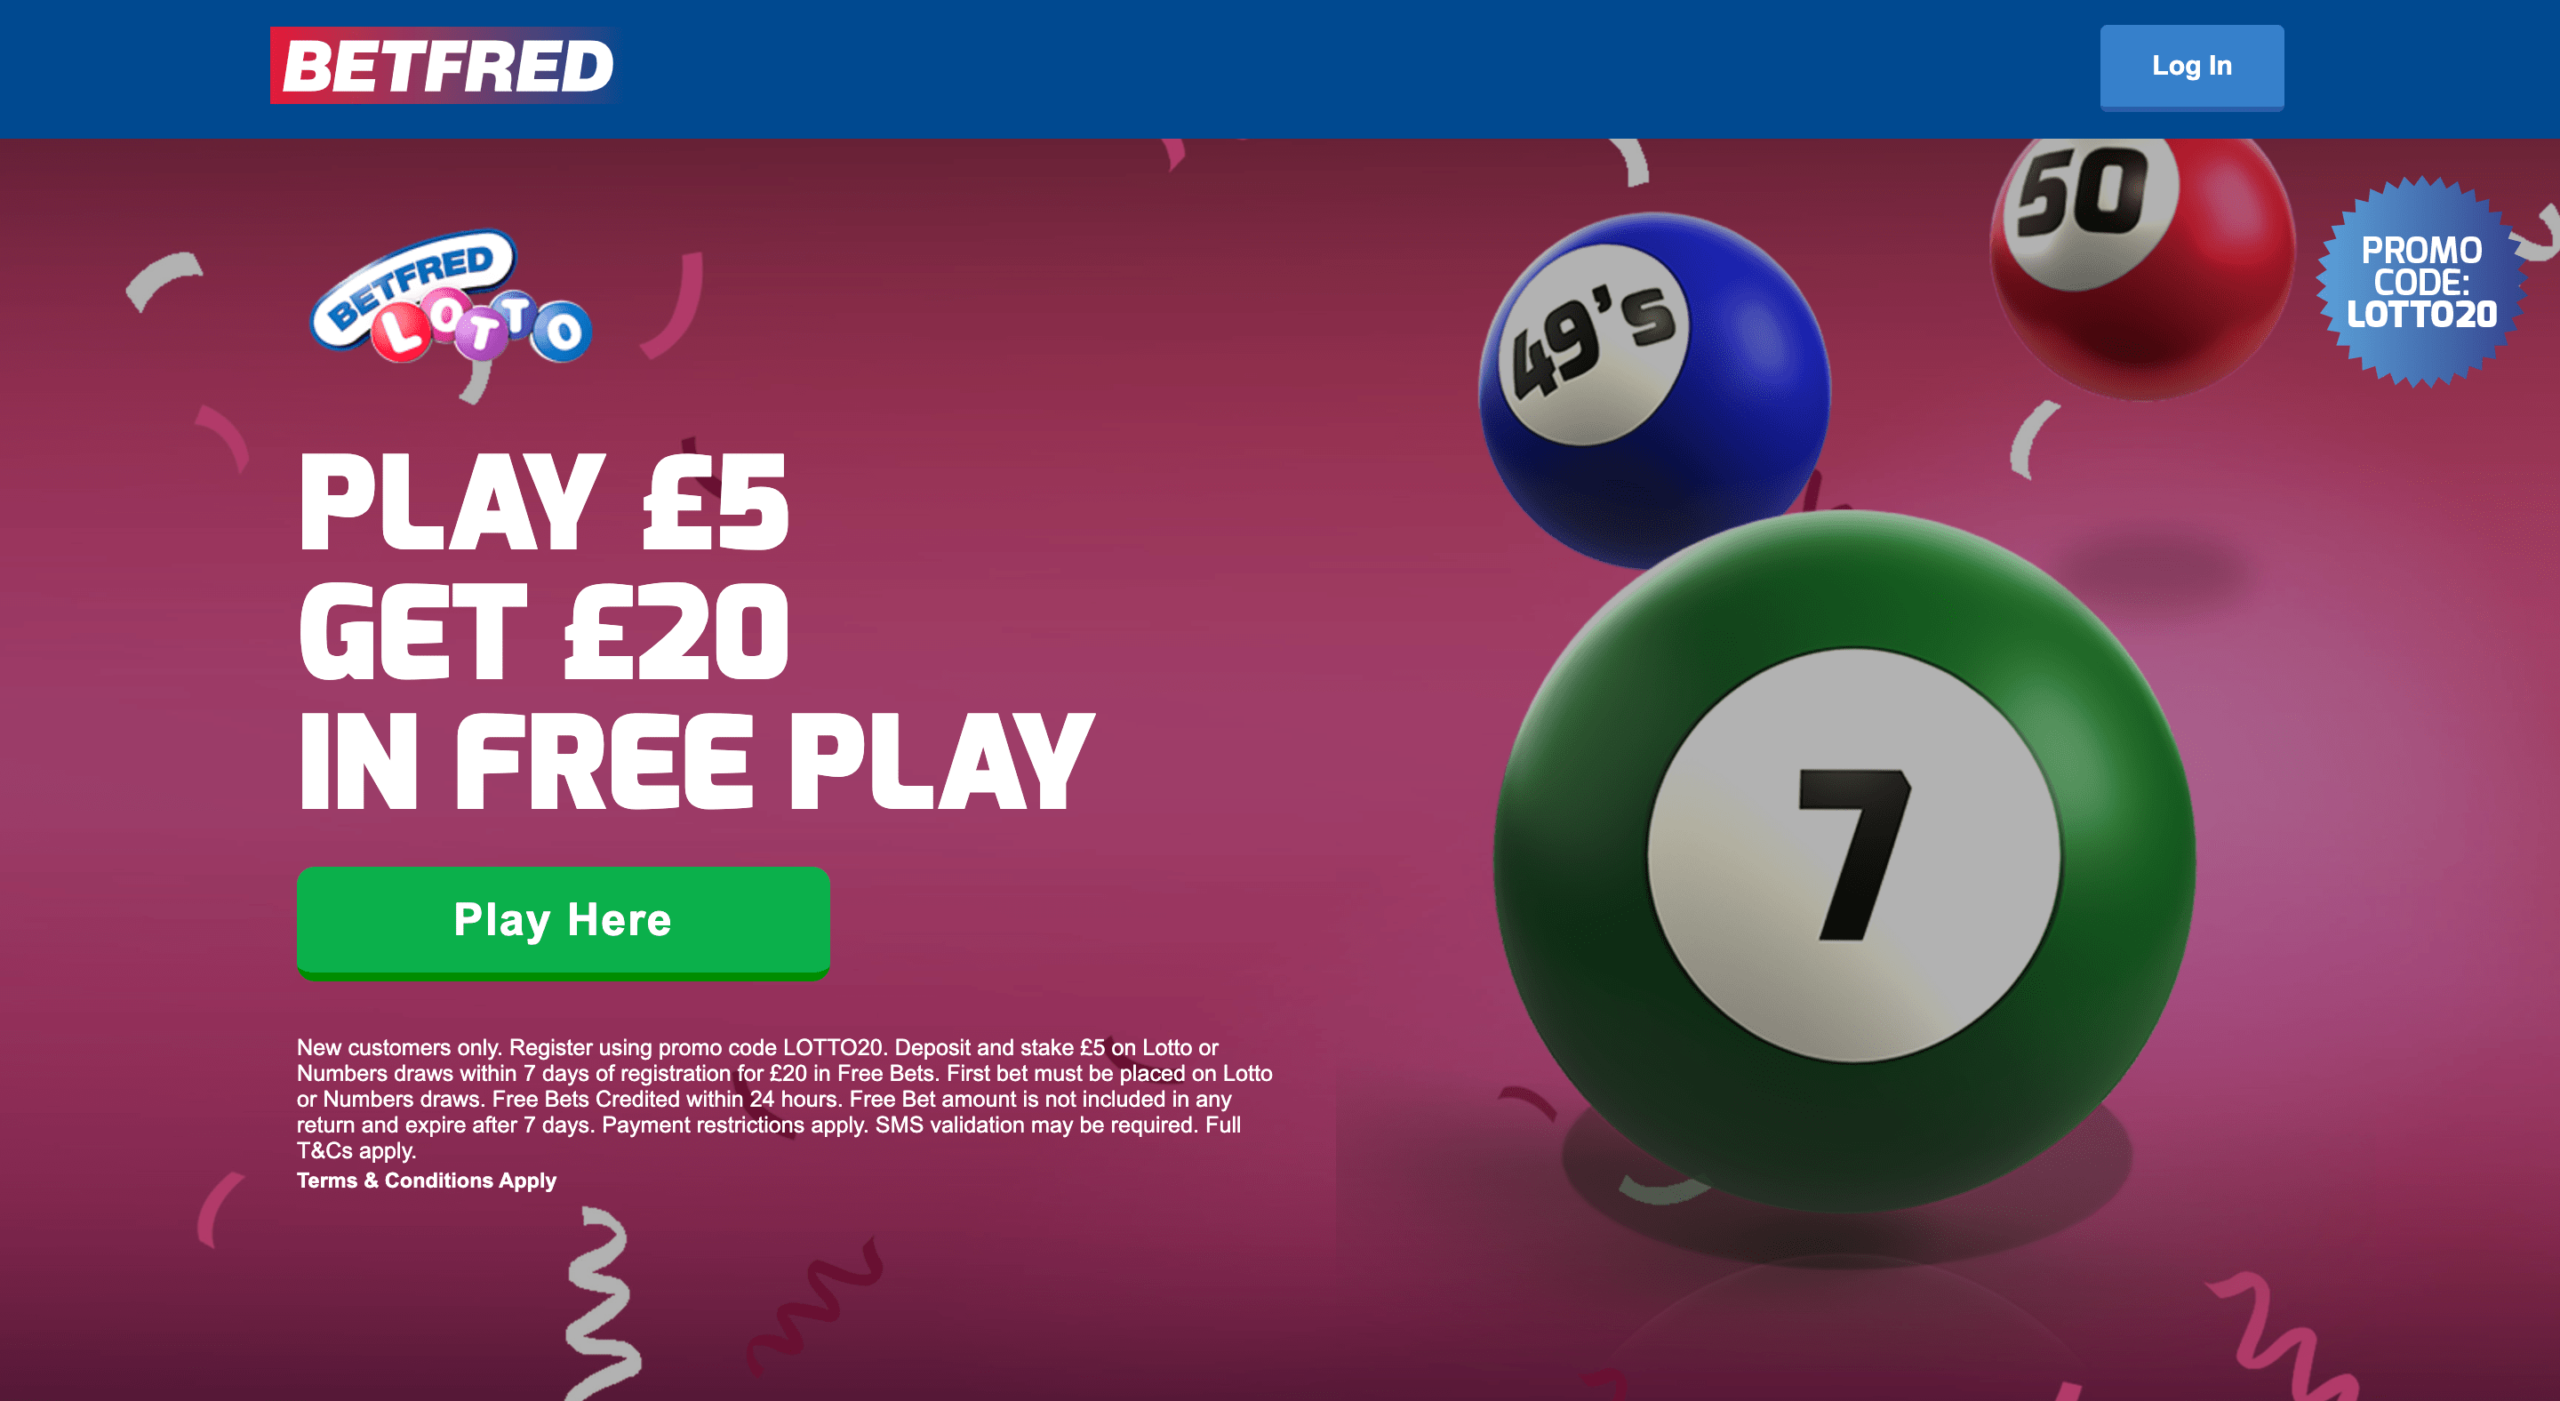 betfred lotto welcome offer